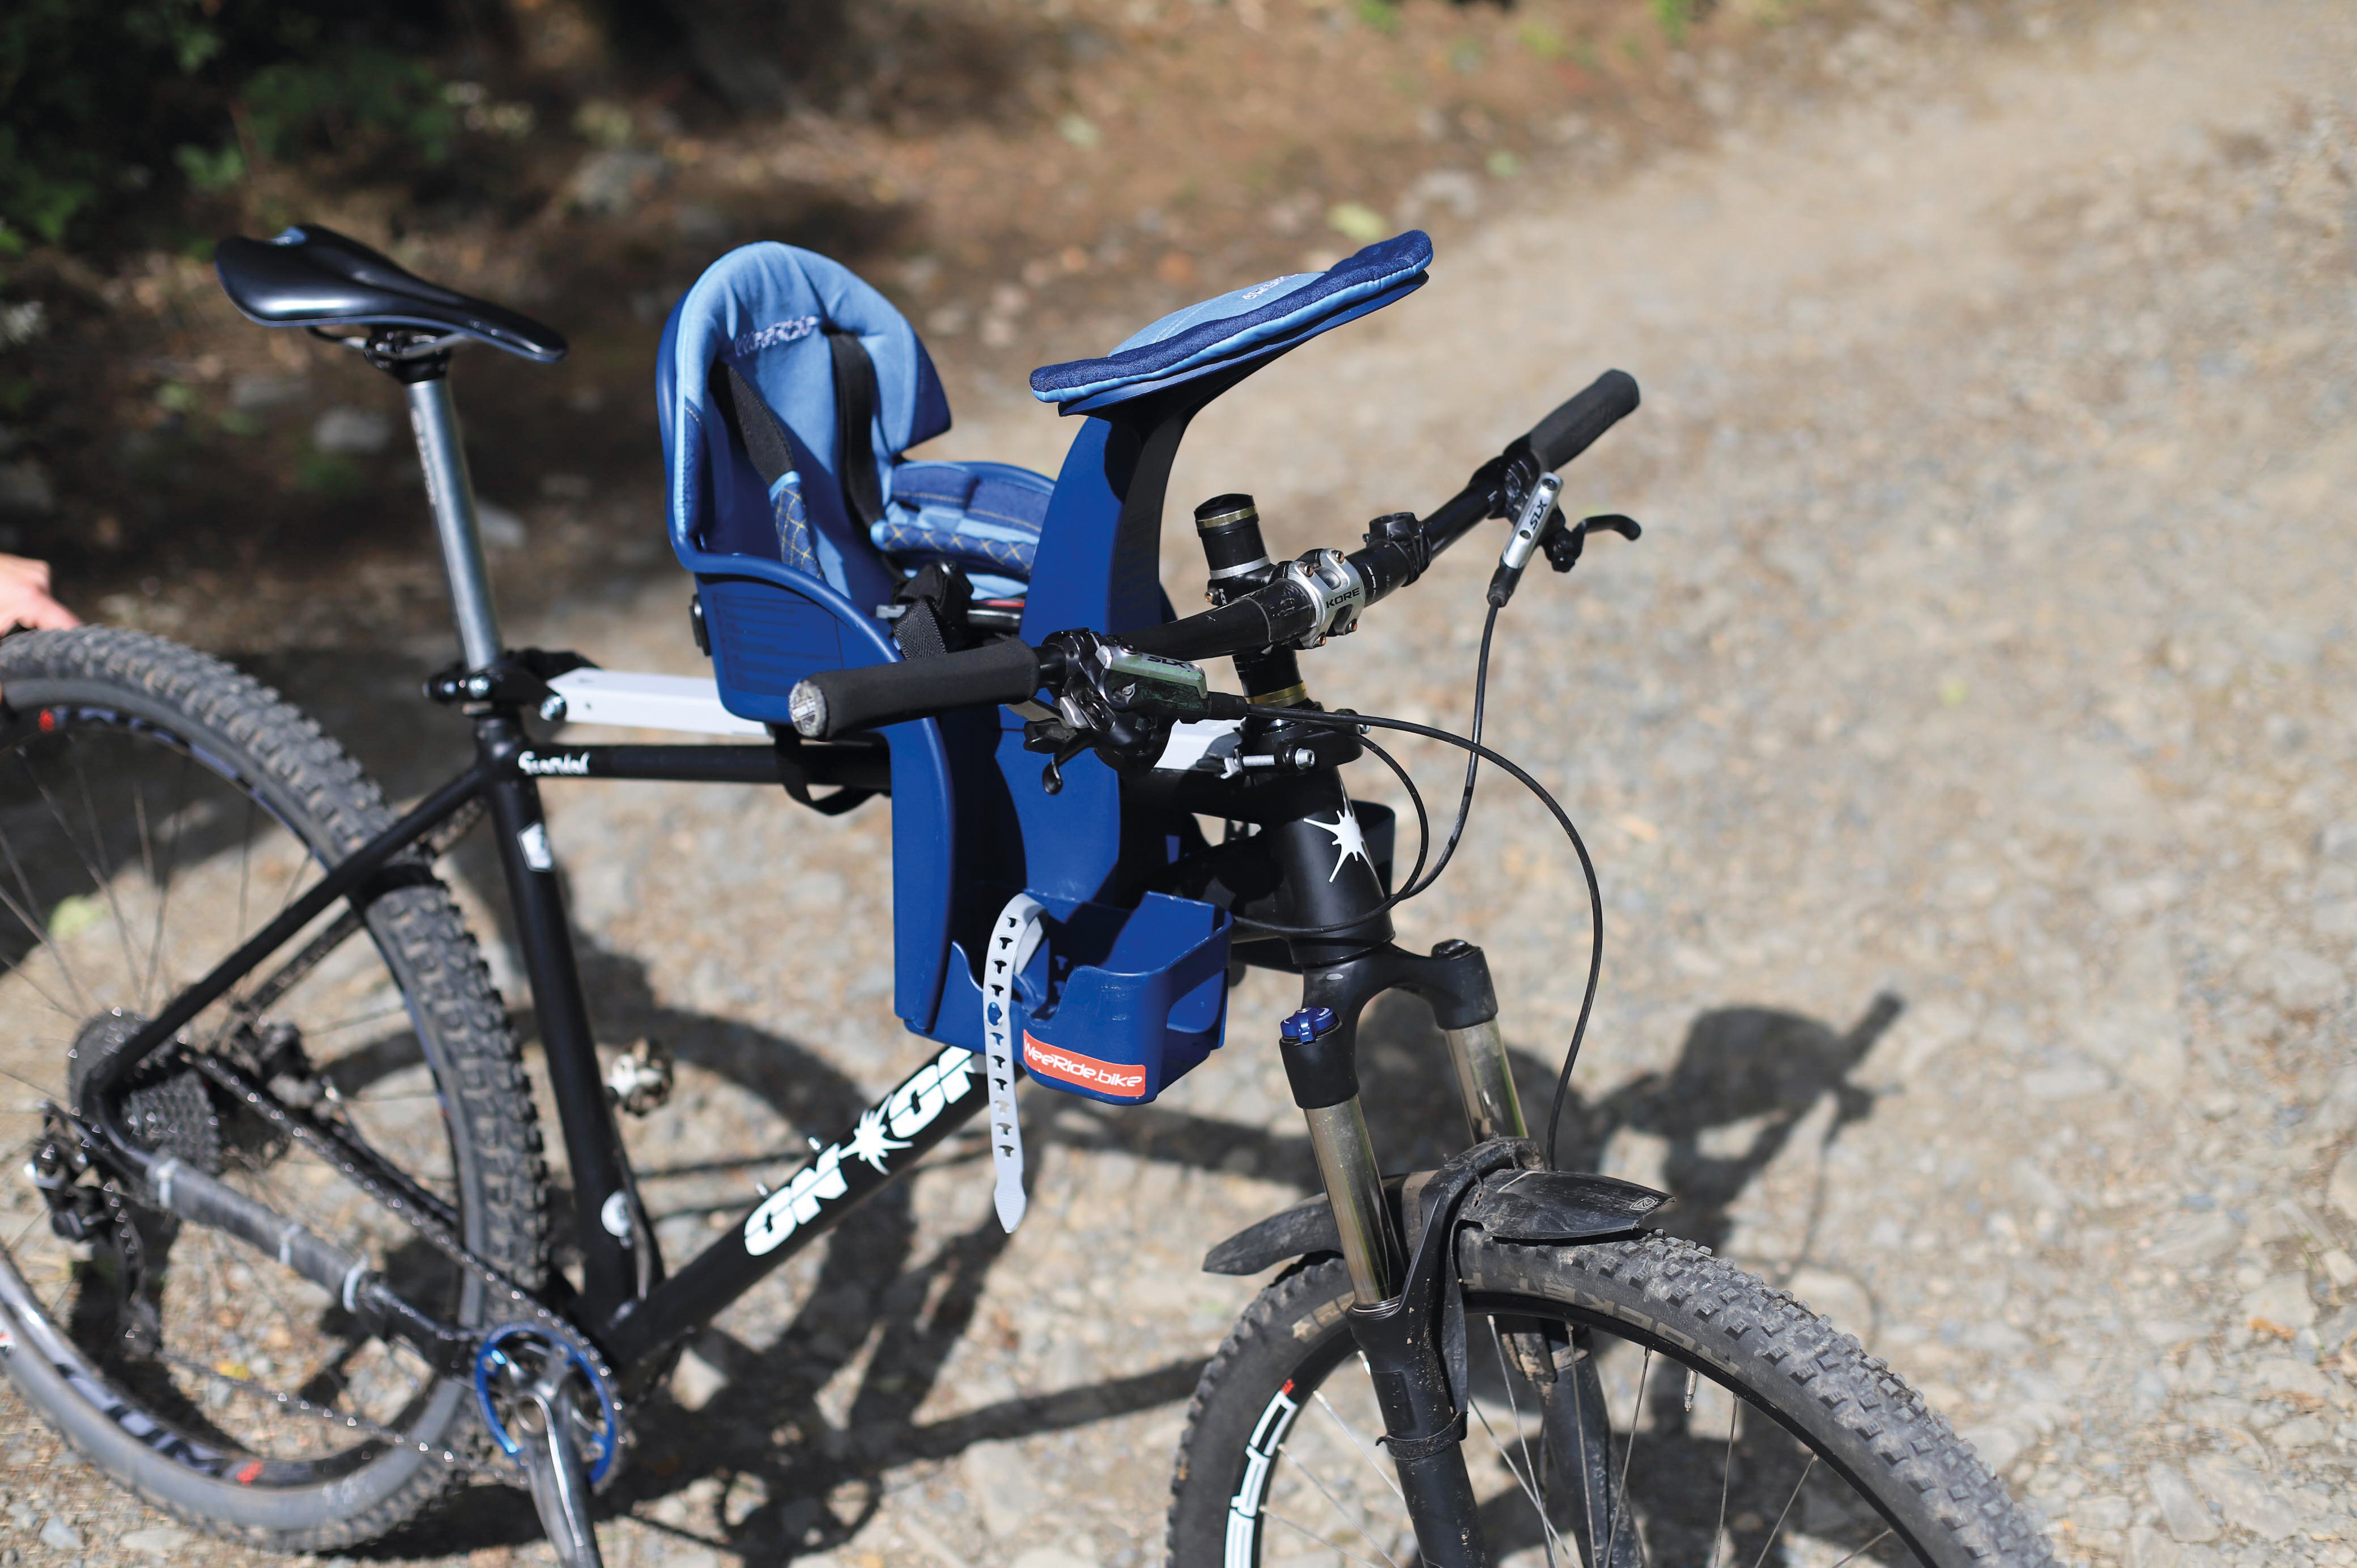 With a child bike seat from Hamax the whole family can get out on tour